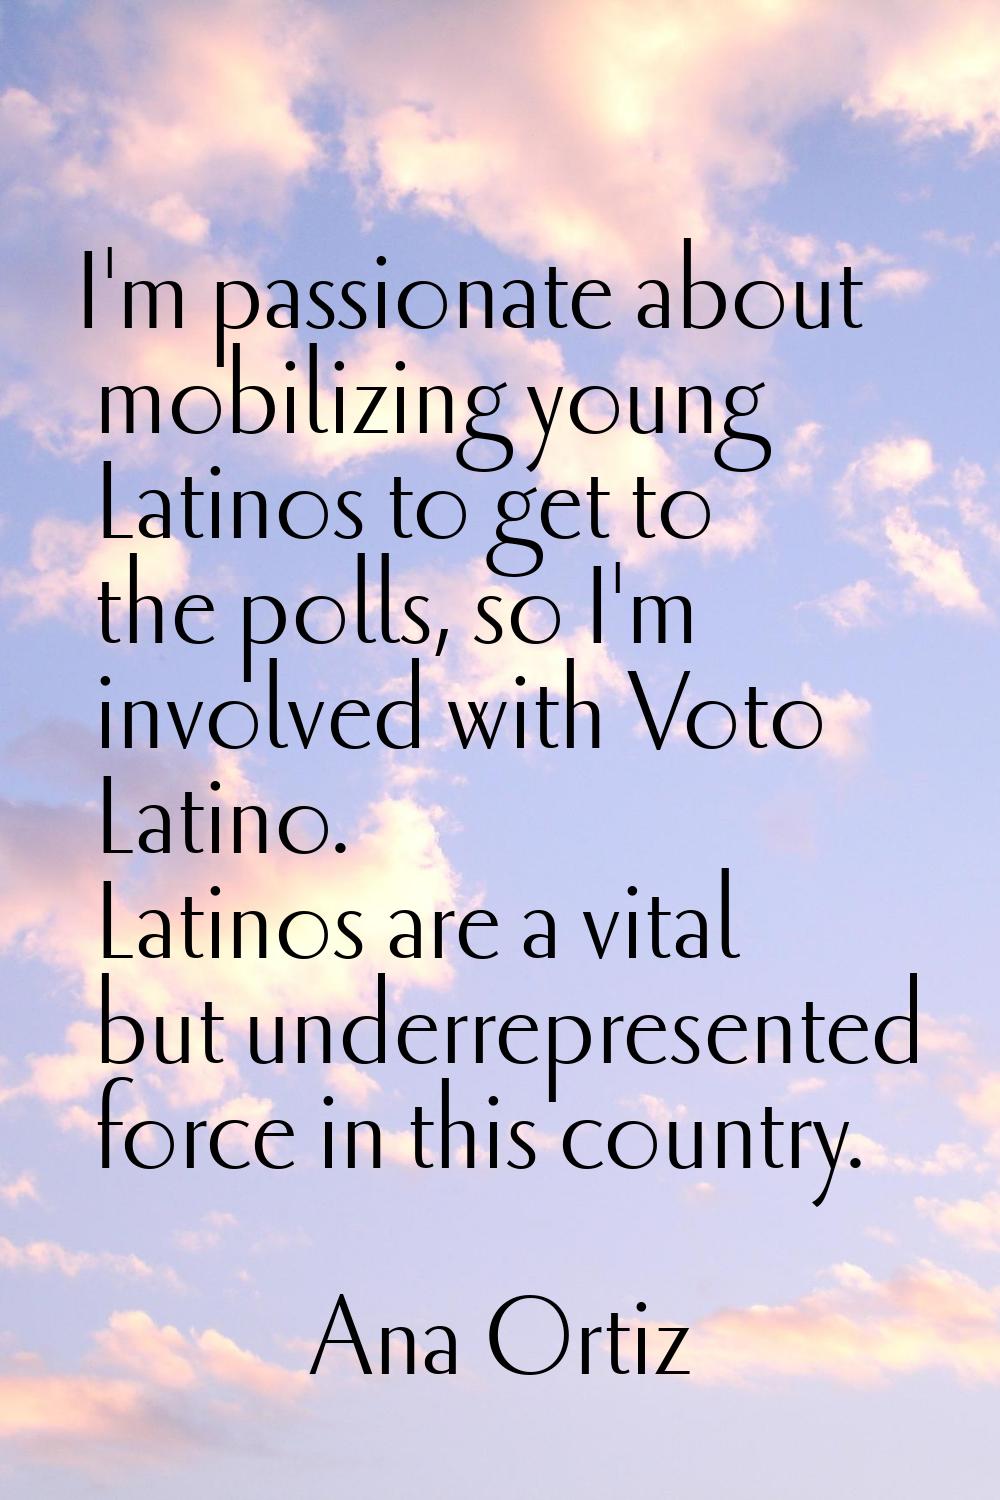 I'm passionate about mobilizing young Latinos to get to the polls, so I'm involved with Voto Latino